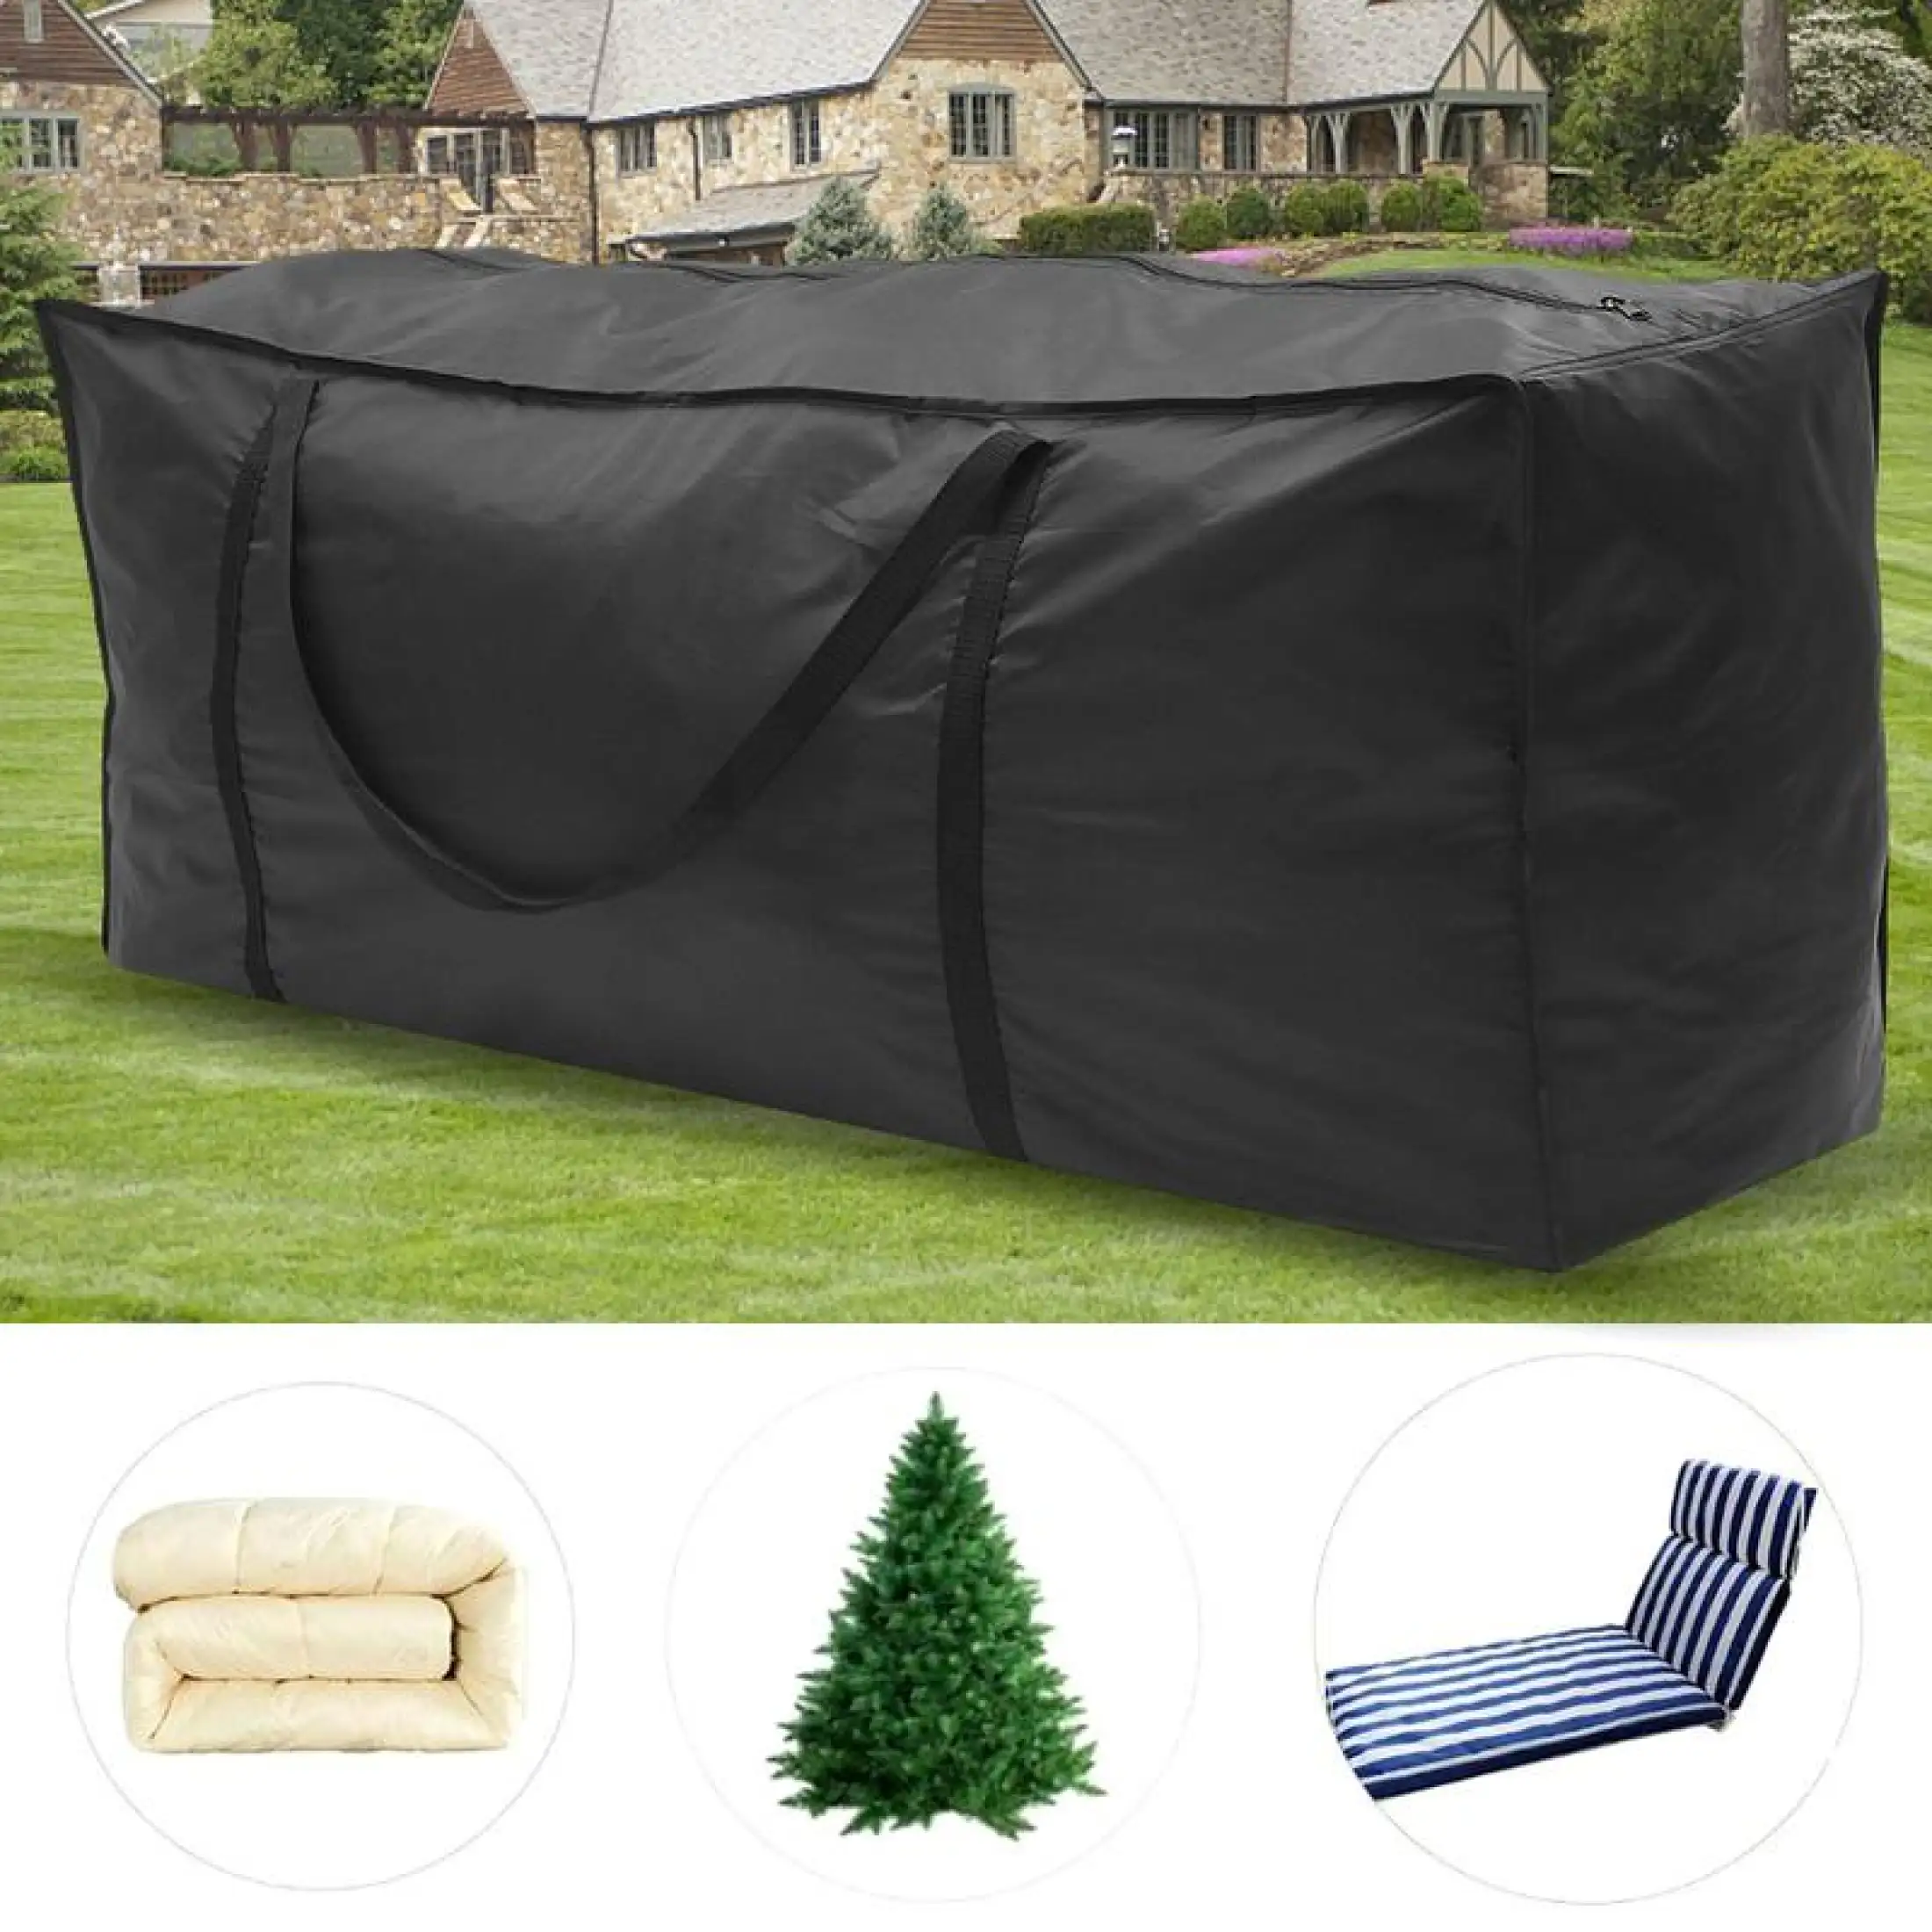 Outdoor Garden Furniture Cushion Storage Bags Pouch Waterproof Case Cover 